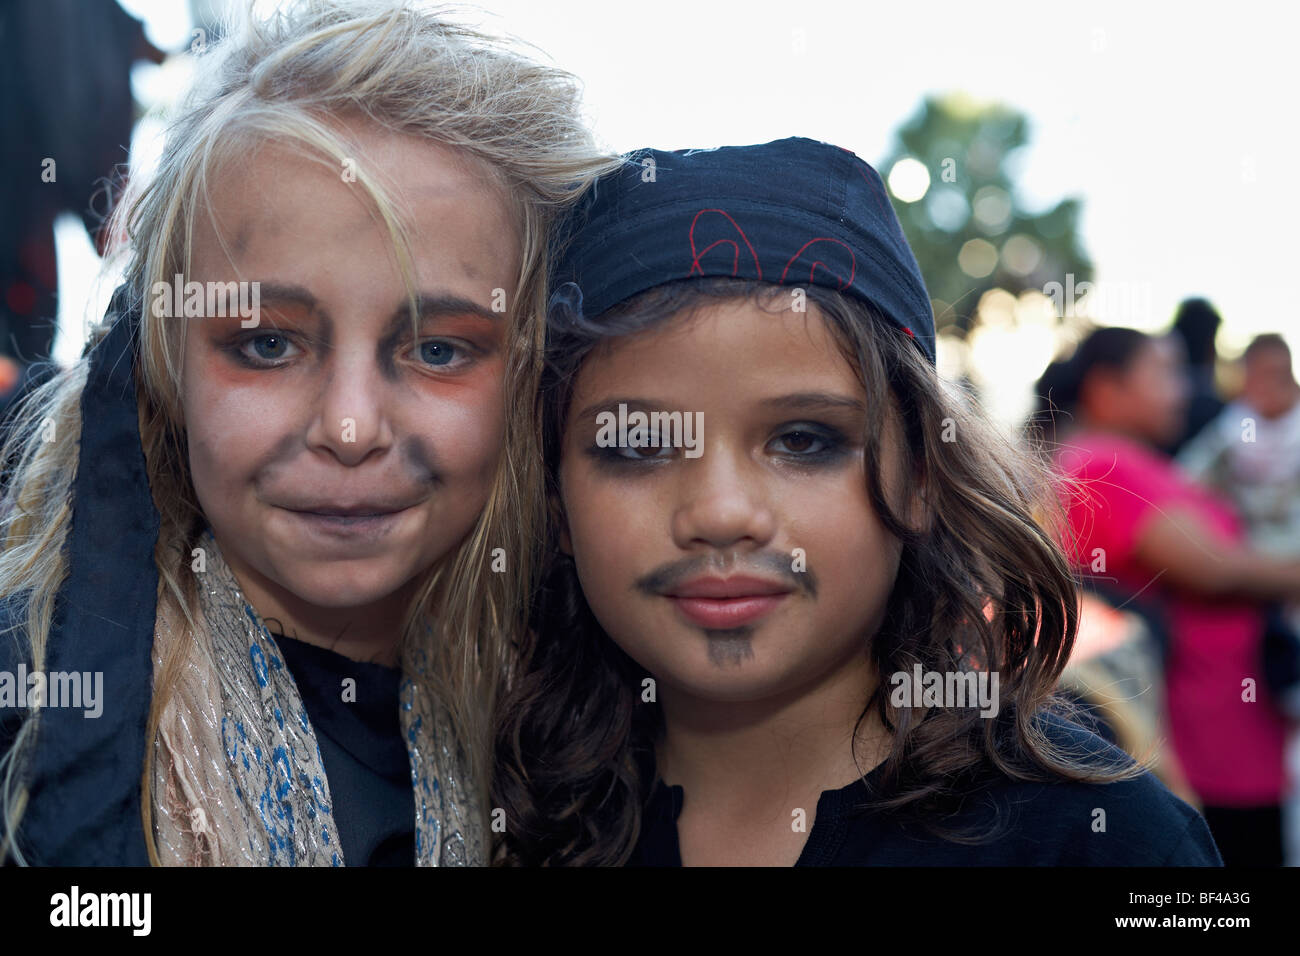 Halloween Children dressed as pirates with appropriate face make up at a Halloween festival Stock Photo